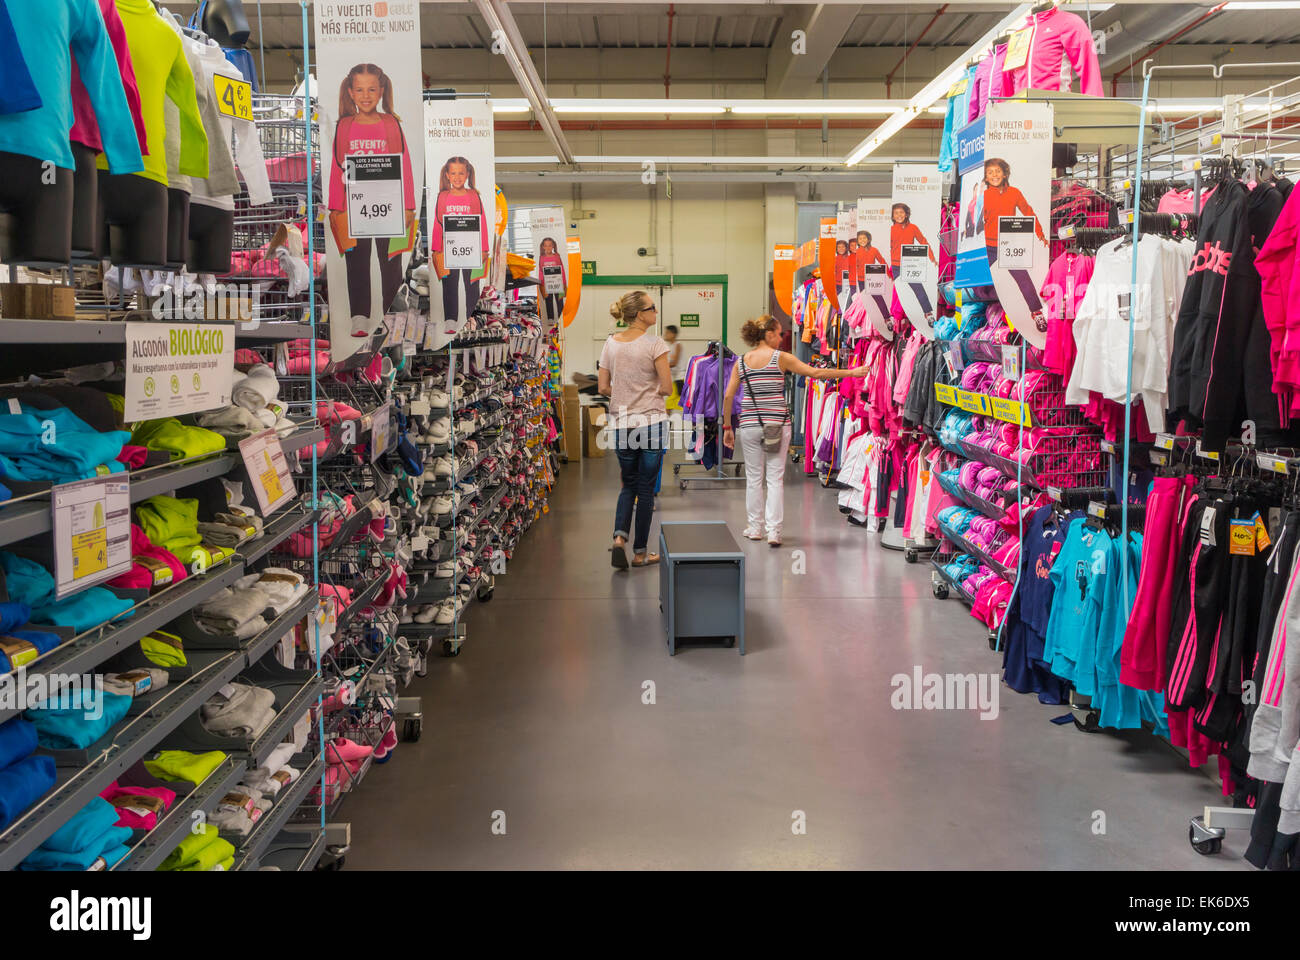 Shopping for children's clothes in the Decathlon store, Malaga, Spain. Stock Photo